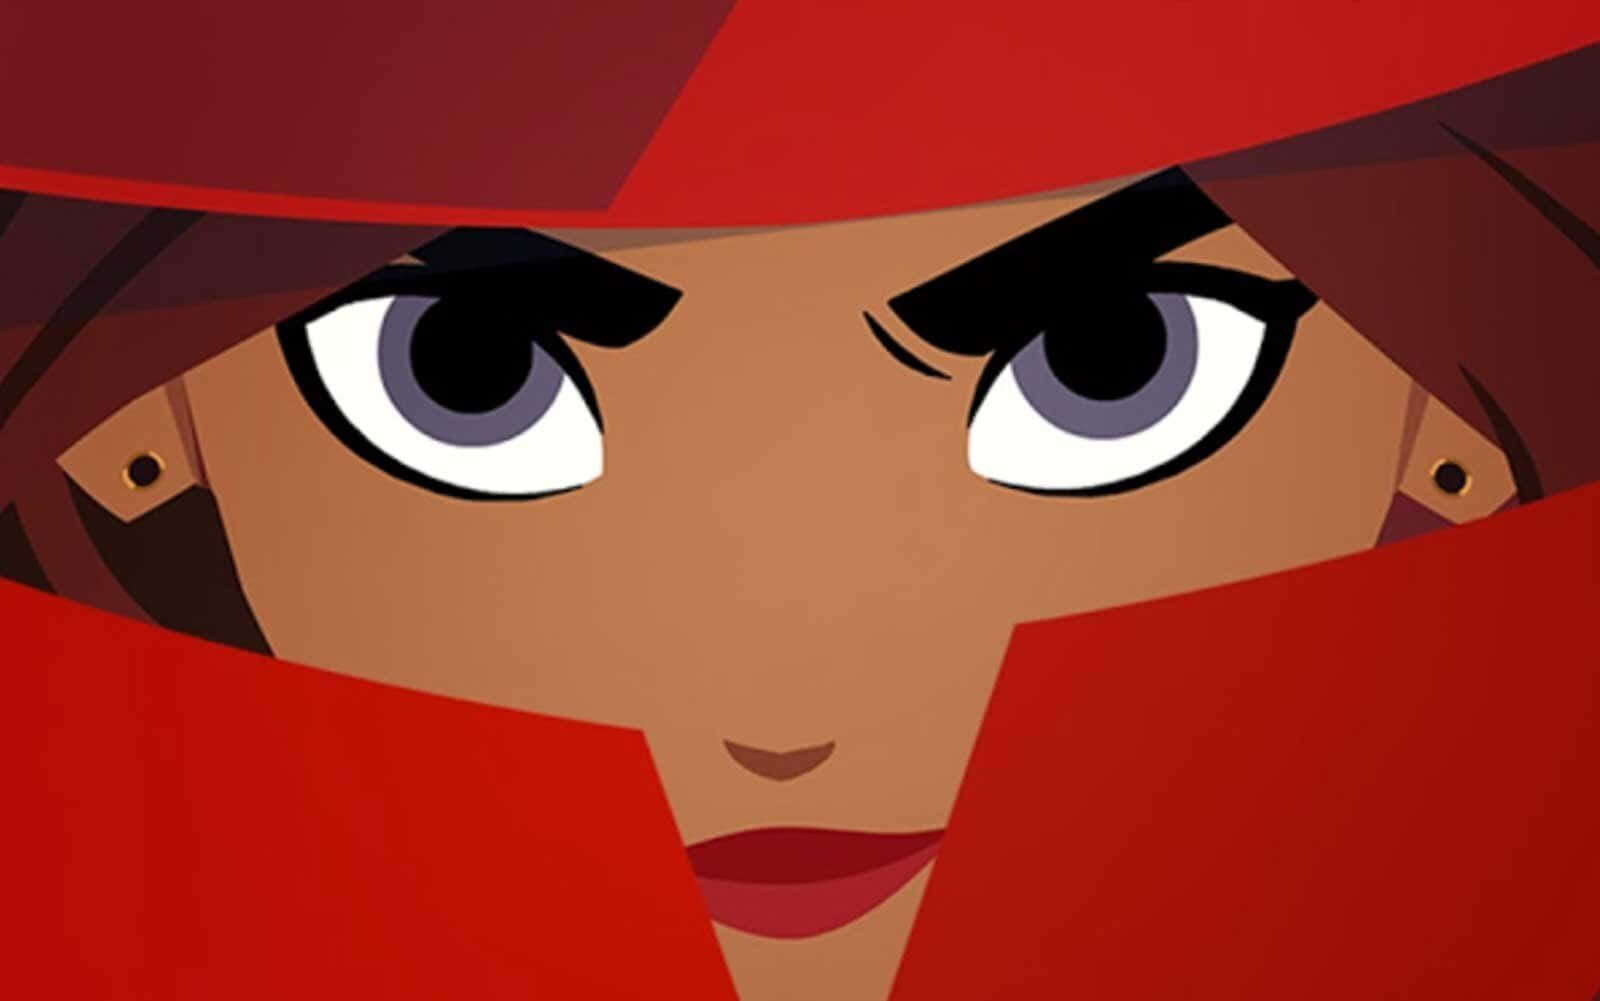 Carlos and Carmen Sandiego Take a Stunning Vision Quest Wallpaper